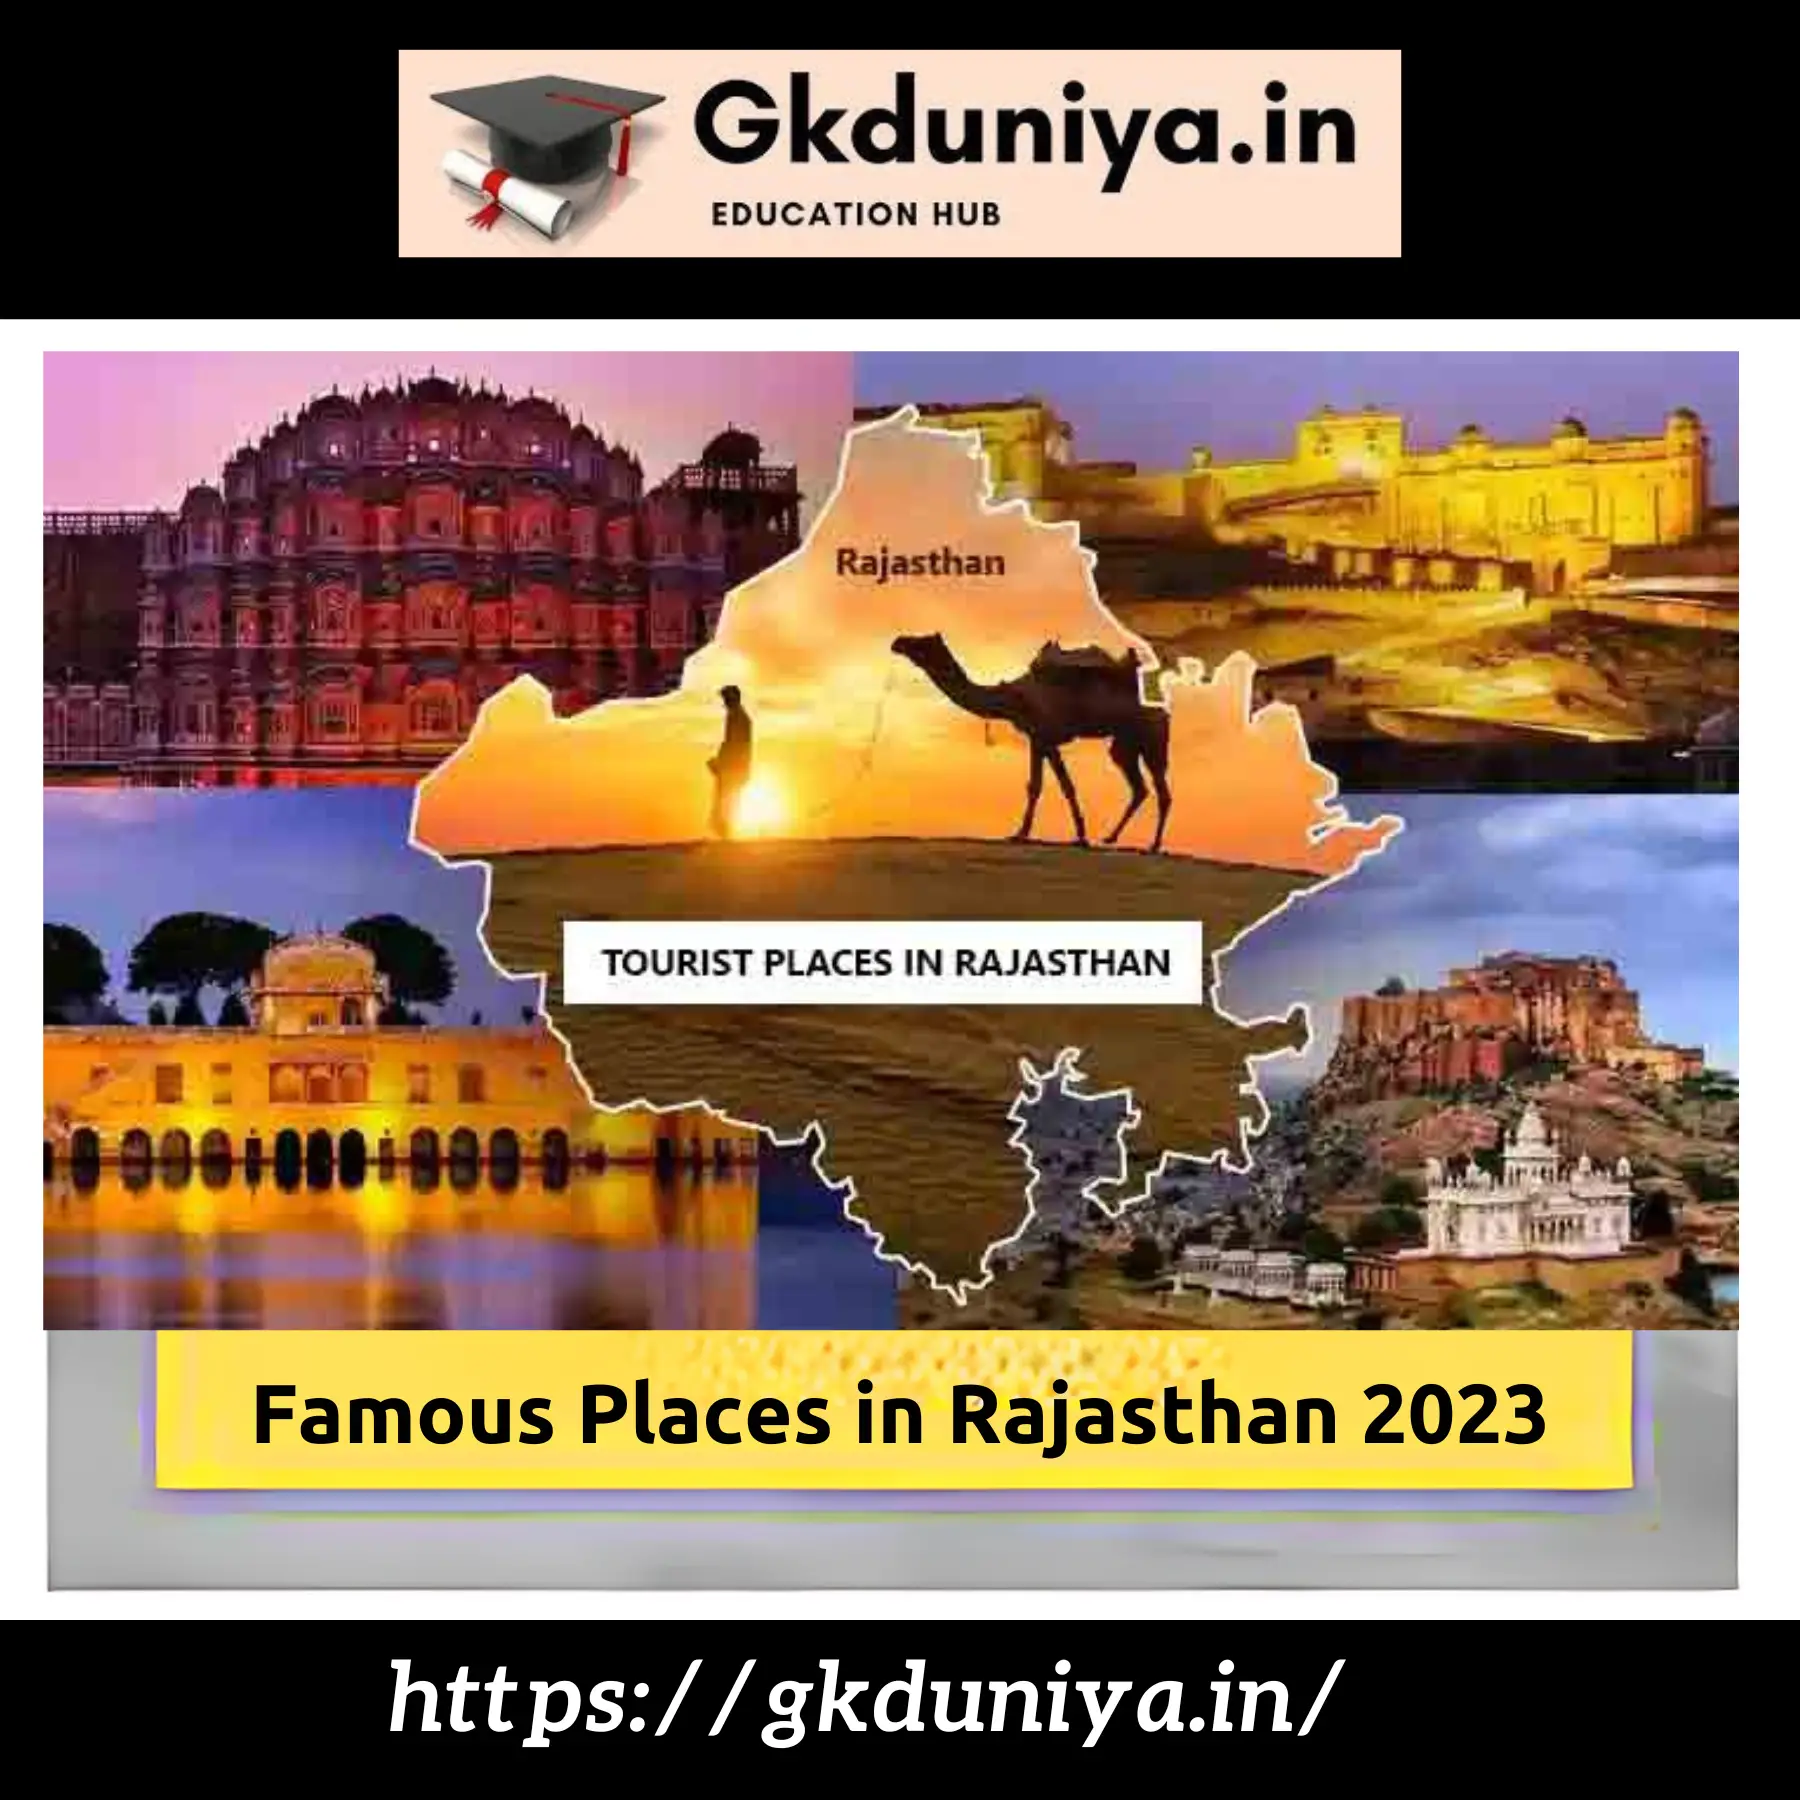 Famous Places in Rajasthan 2023